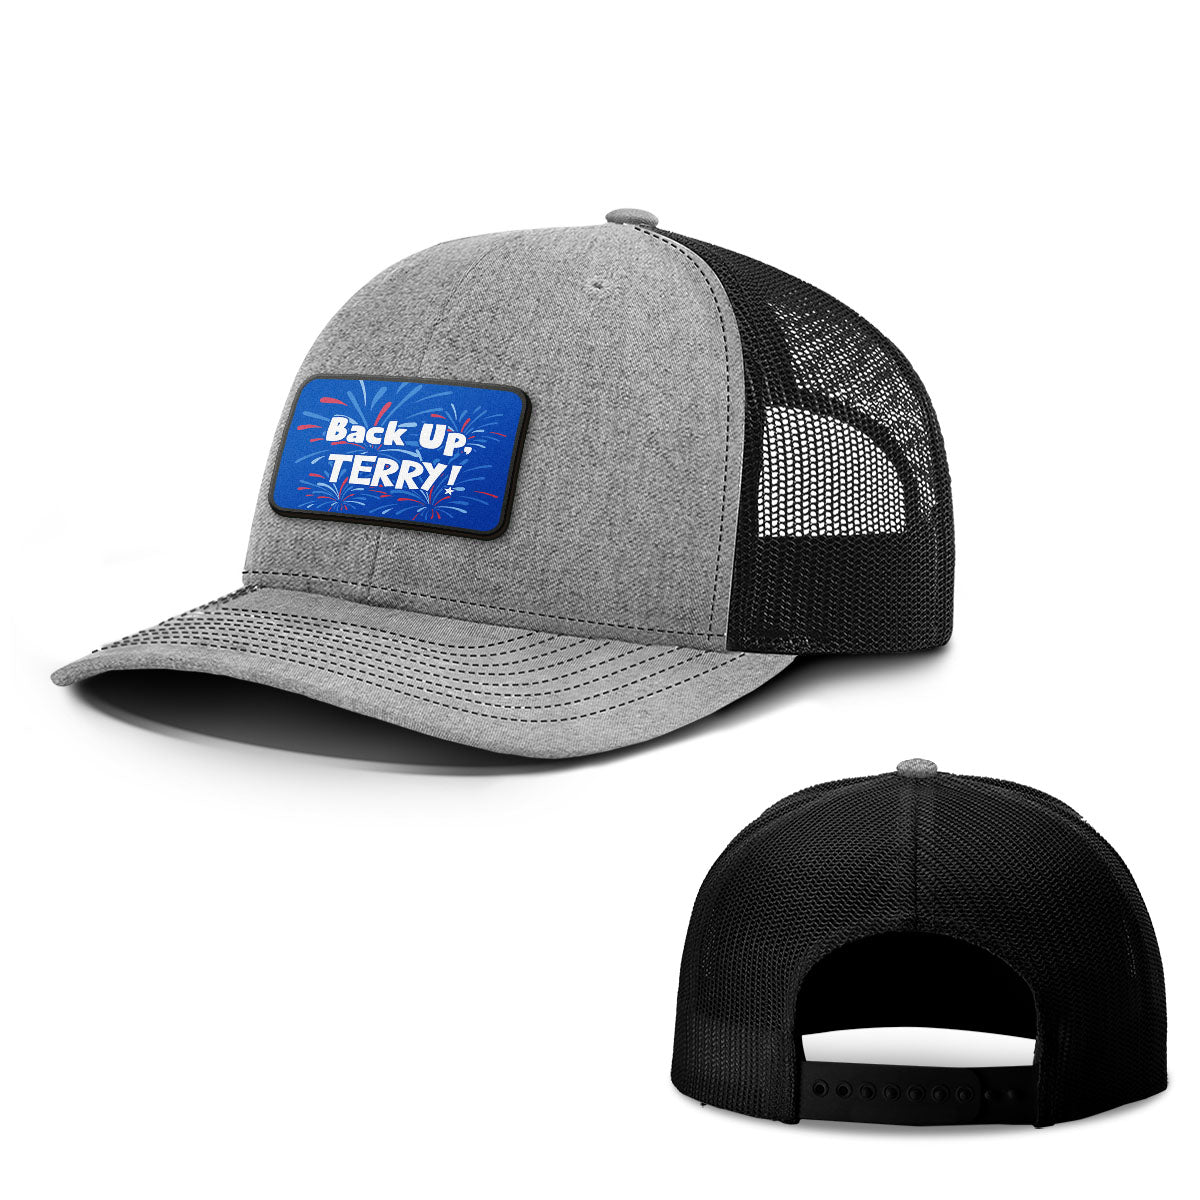 Back Up Terry! Patch Hats